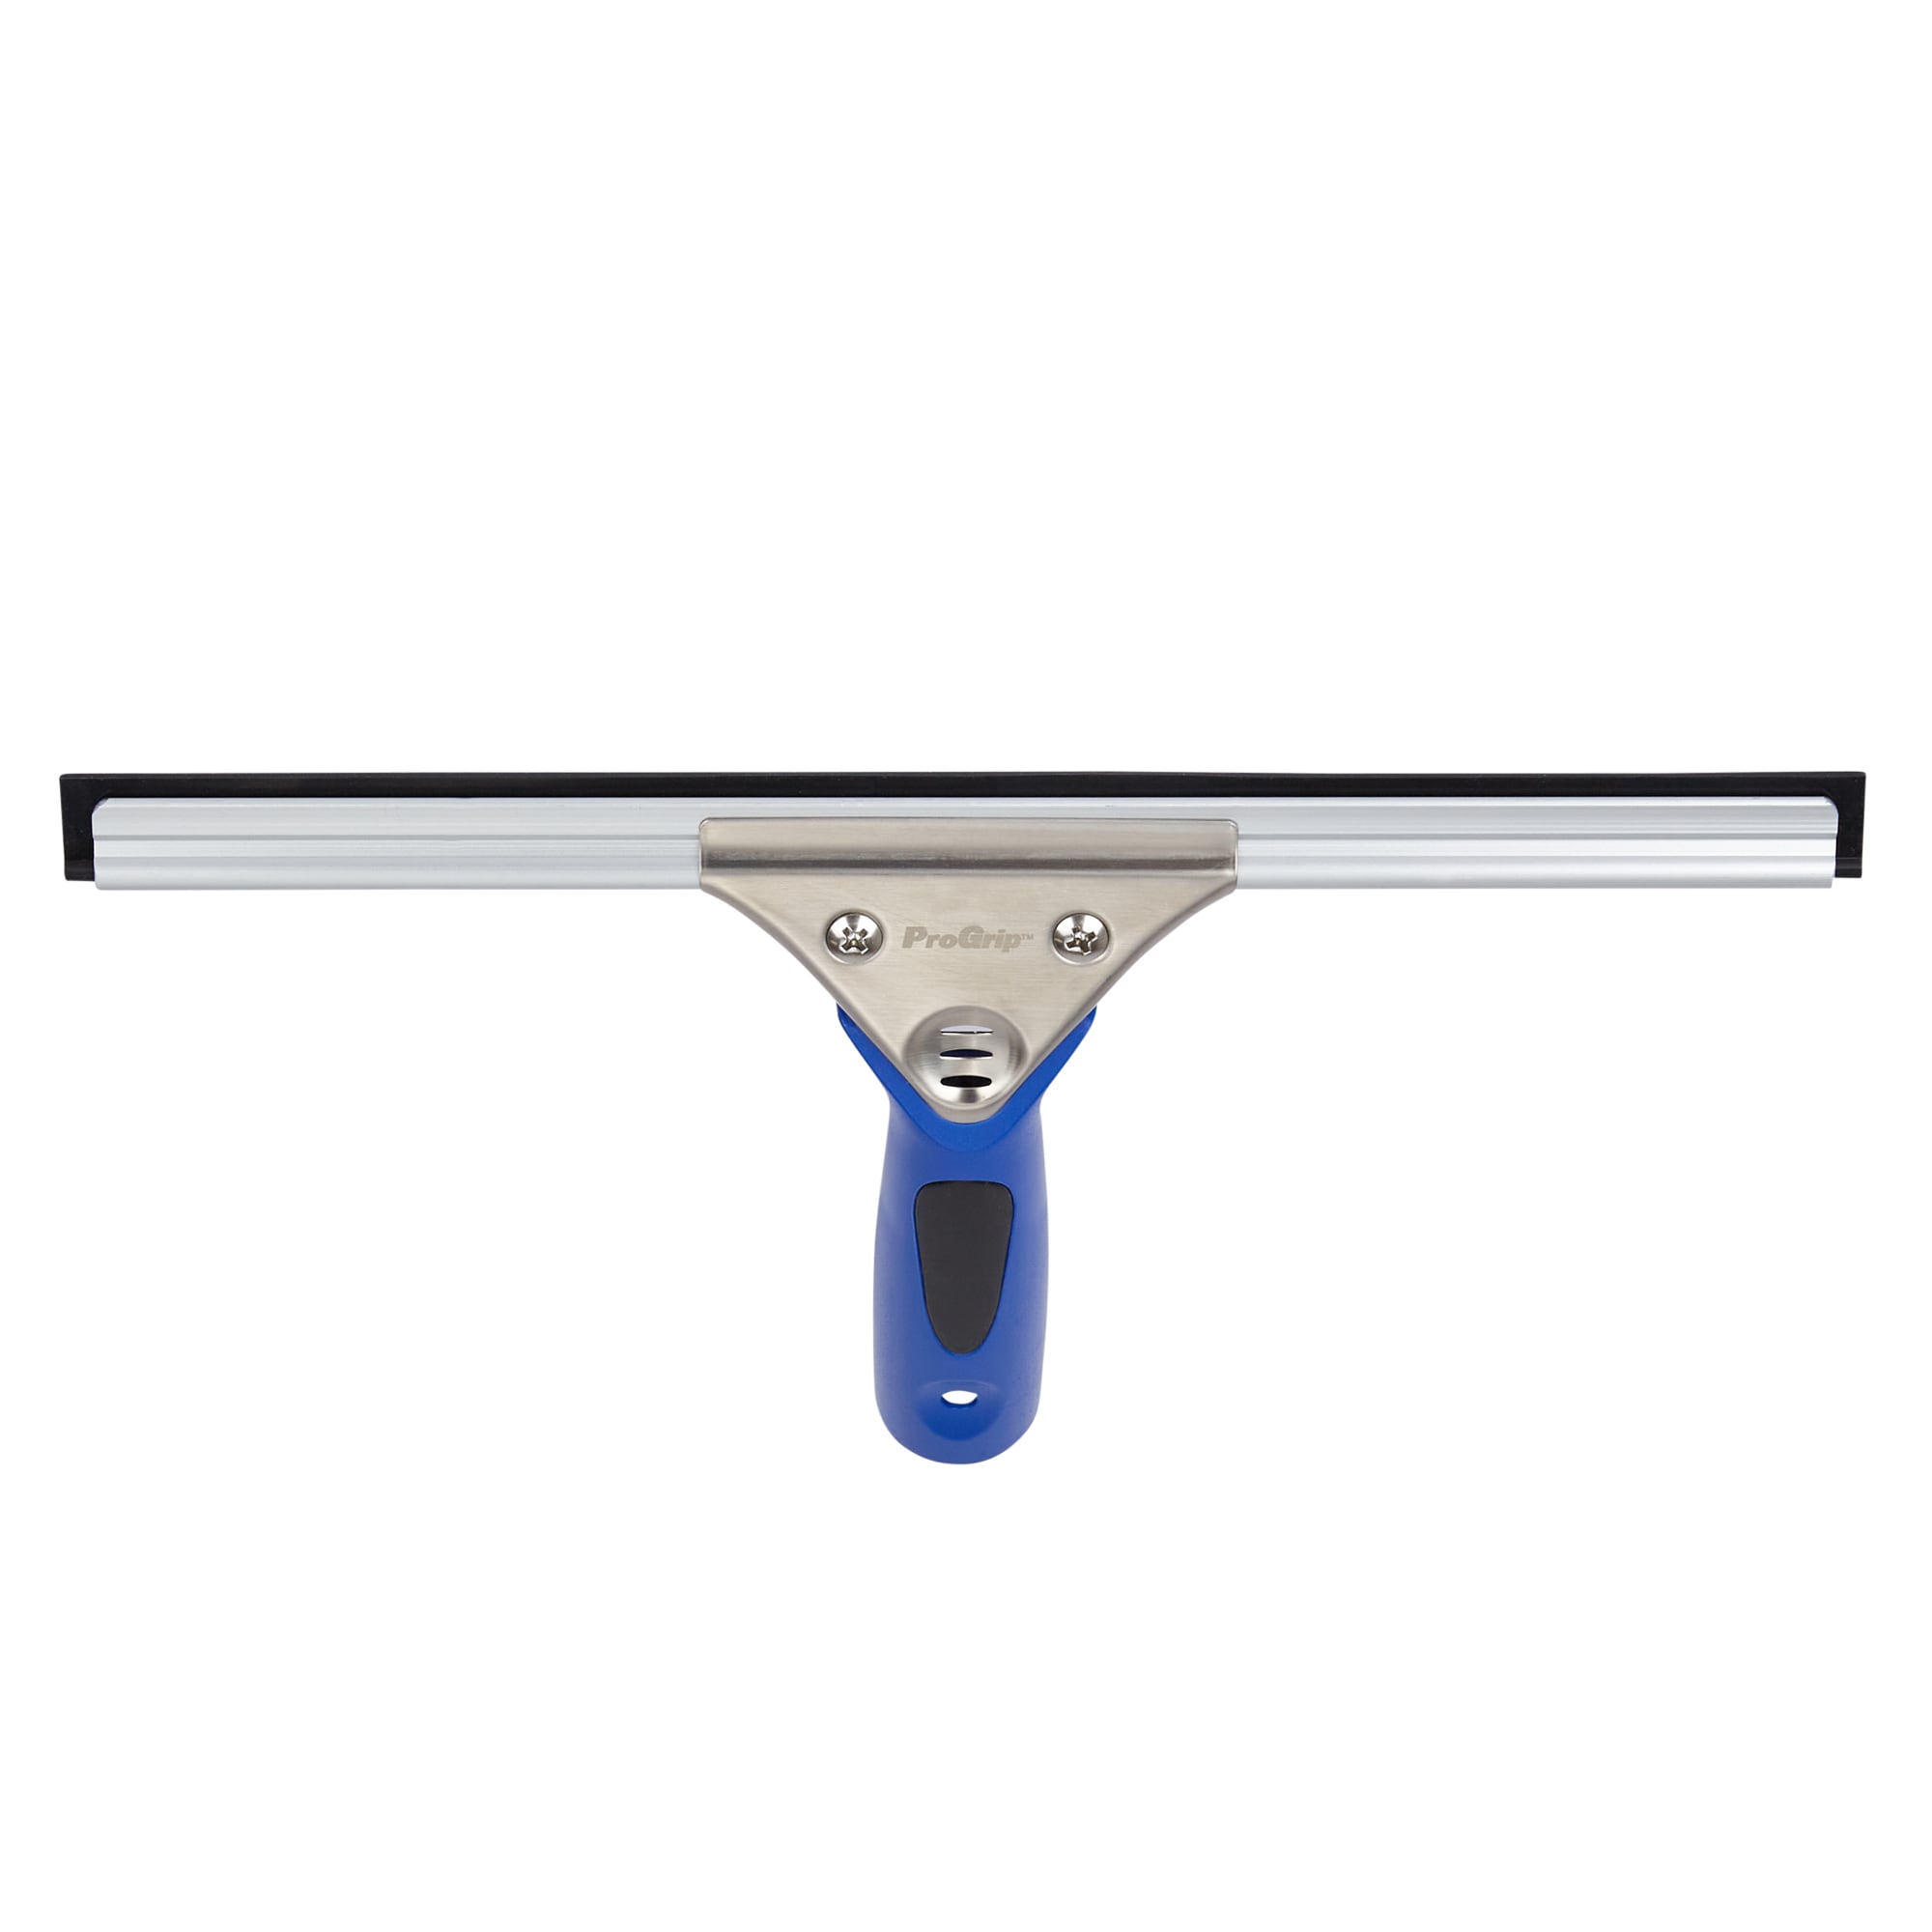 Window Cleaning Supplies, ERGO WALL SQUEEGEE -- GREY